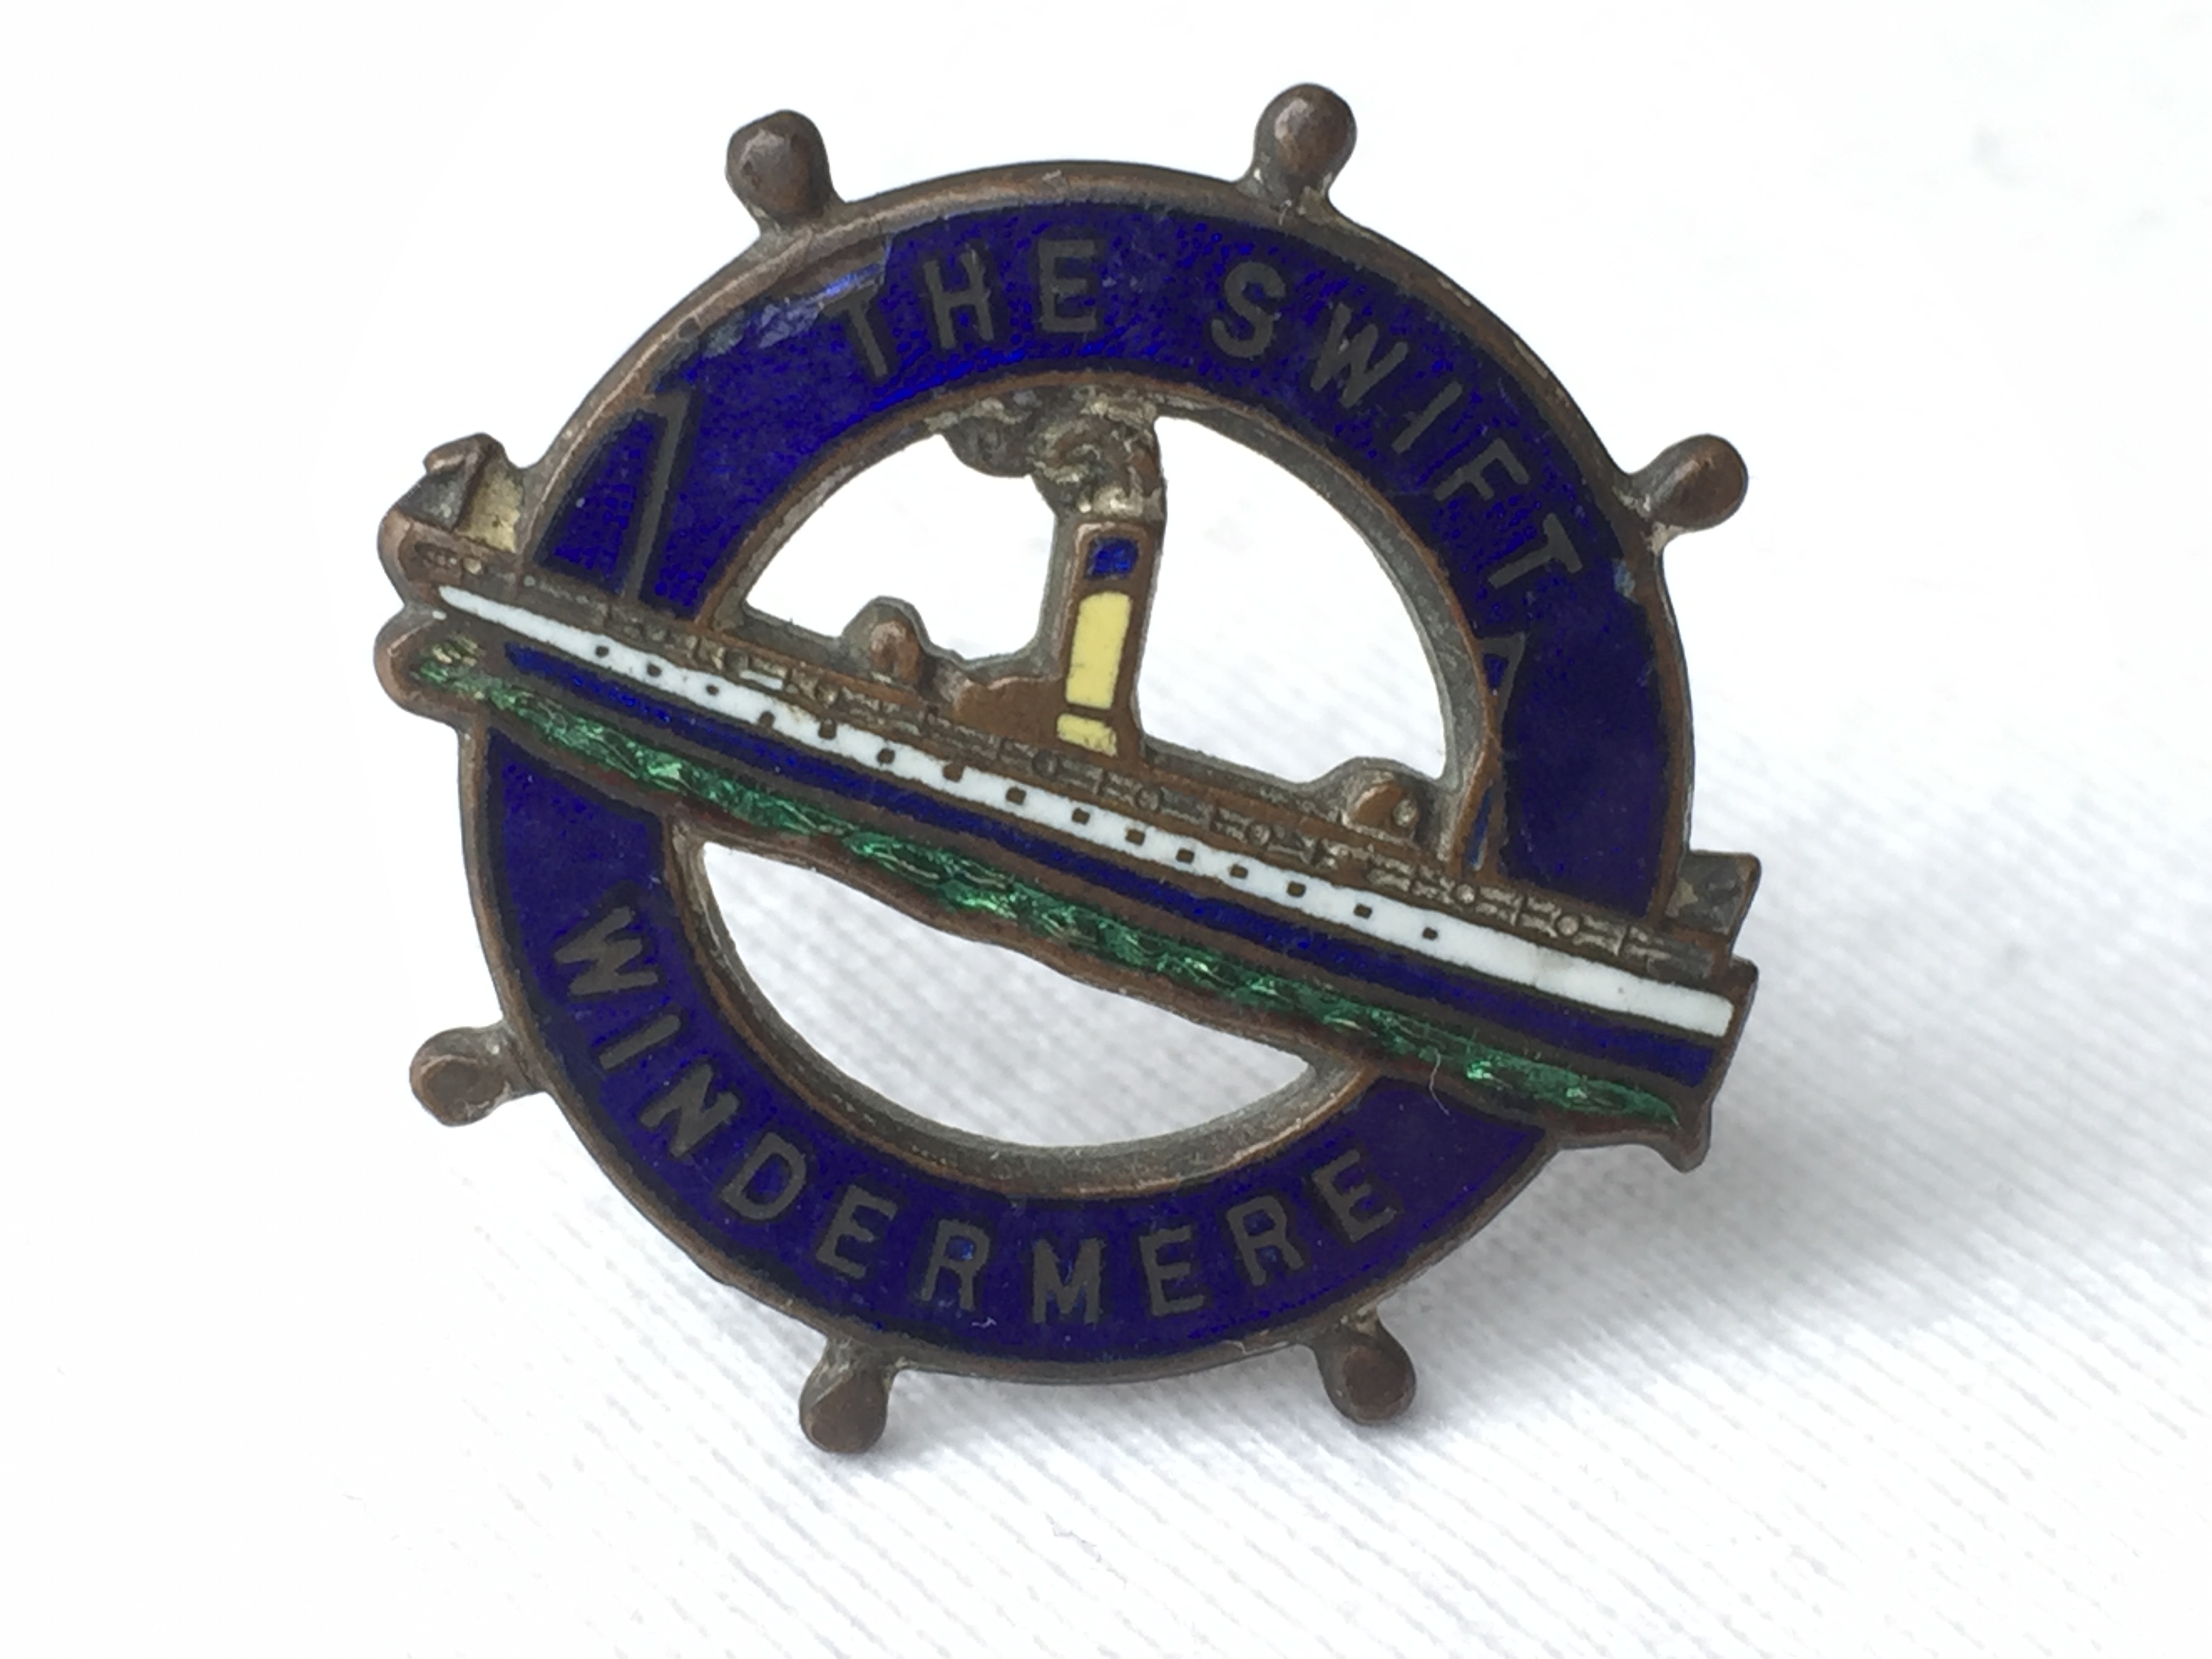 LAPEL PIN BADGE FROM THE WINDERMERE STEAMERS LINE VESSEL THE SWIFT 